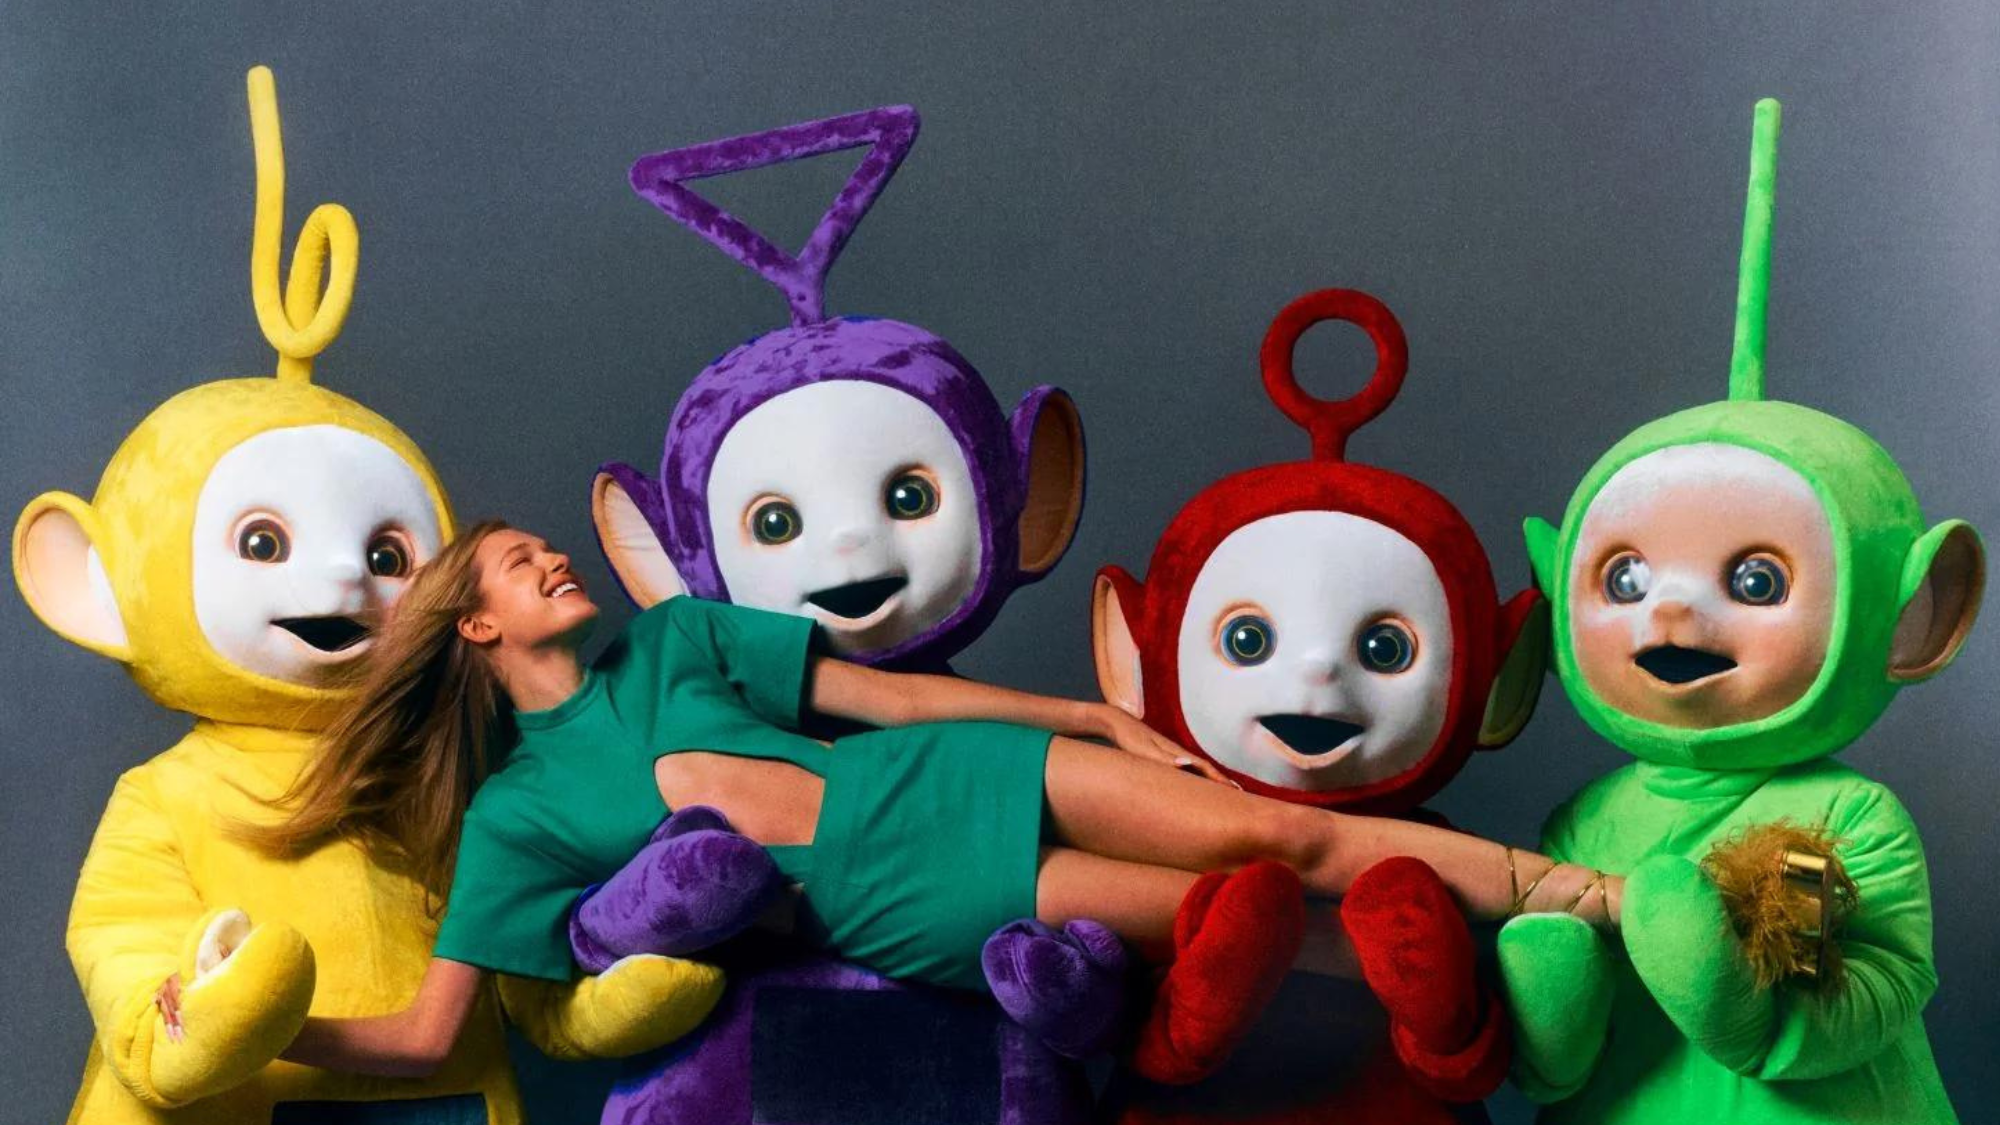 Christian Cowan x Teletubbies Takes It Back to the 90s